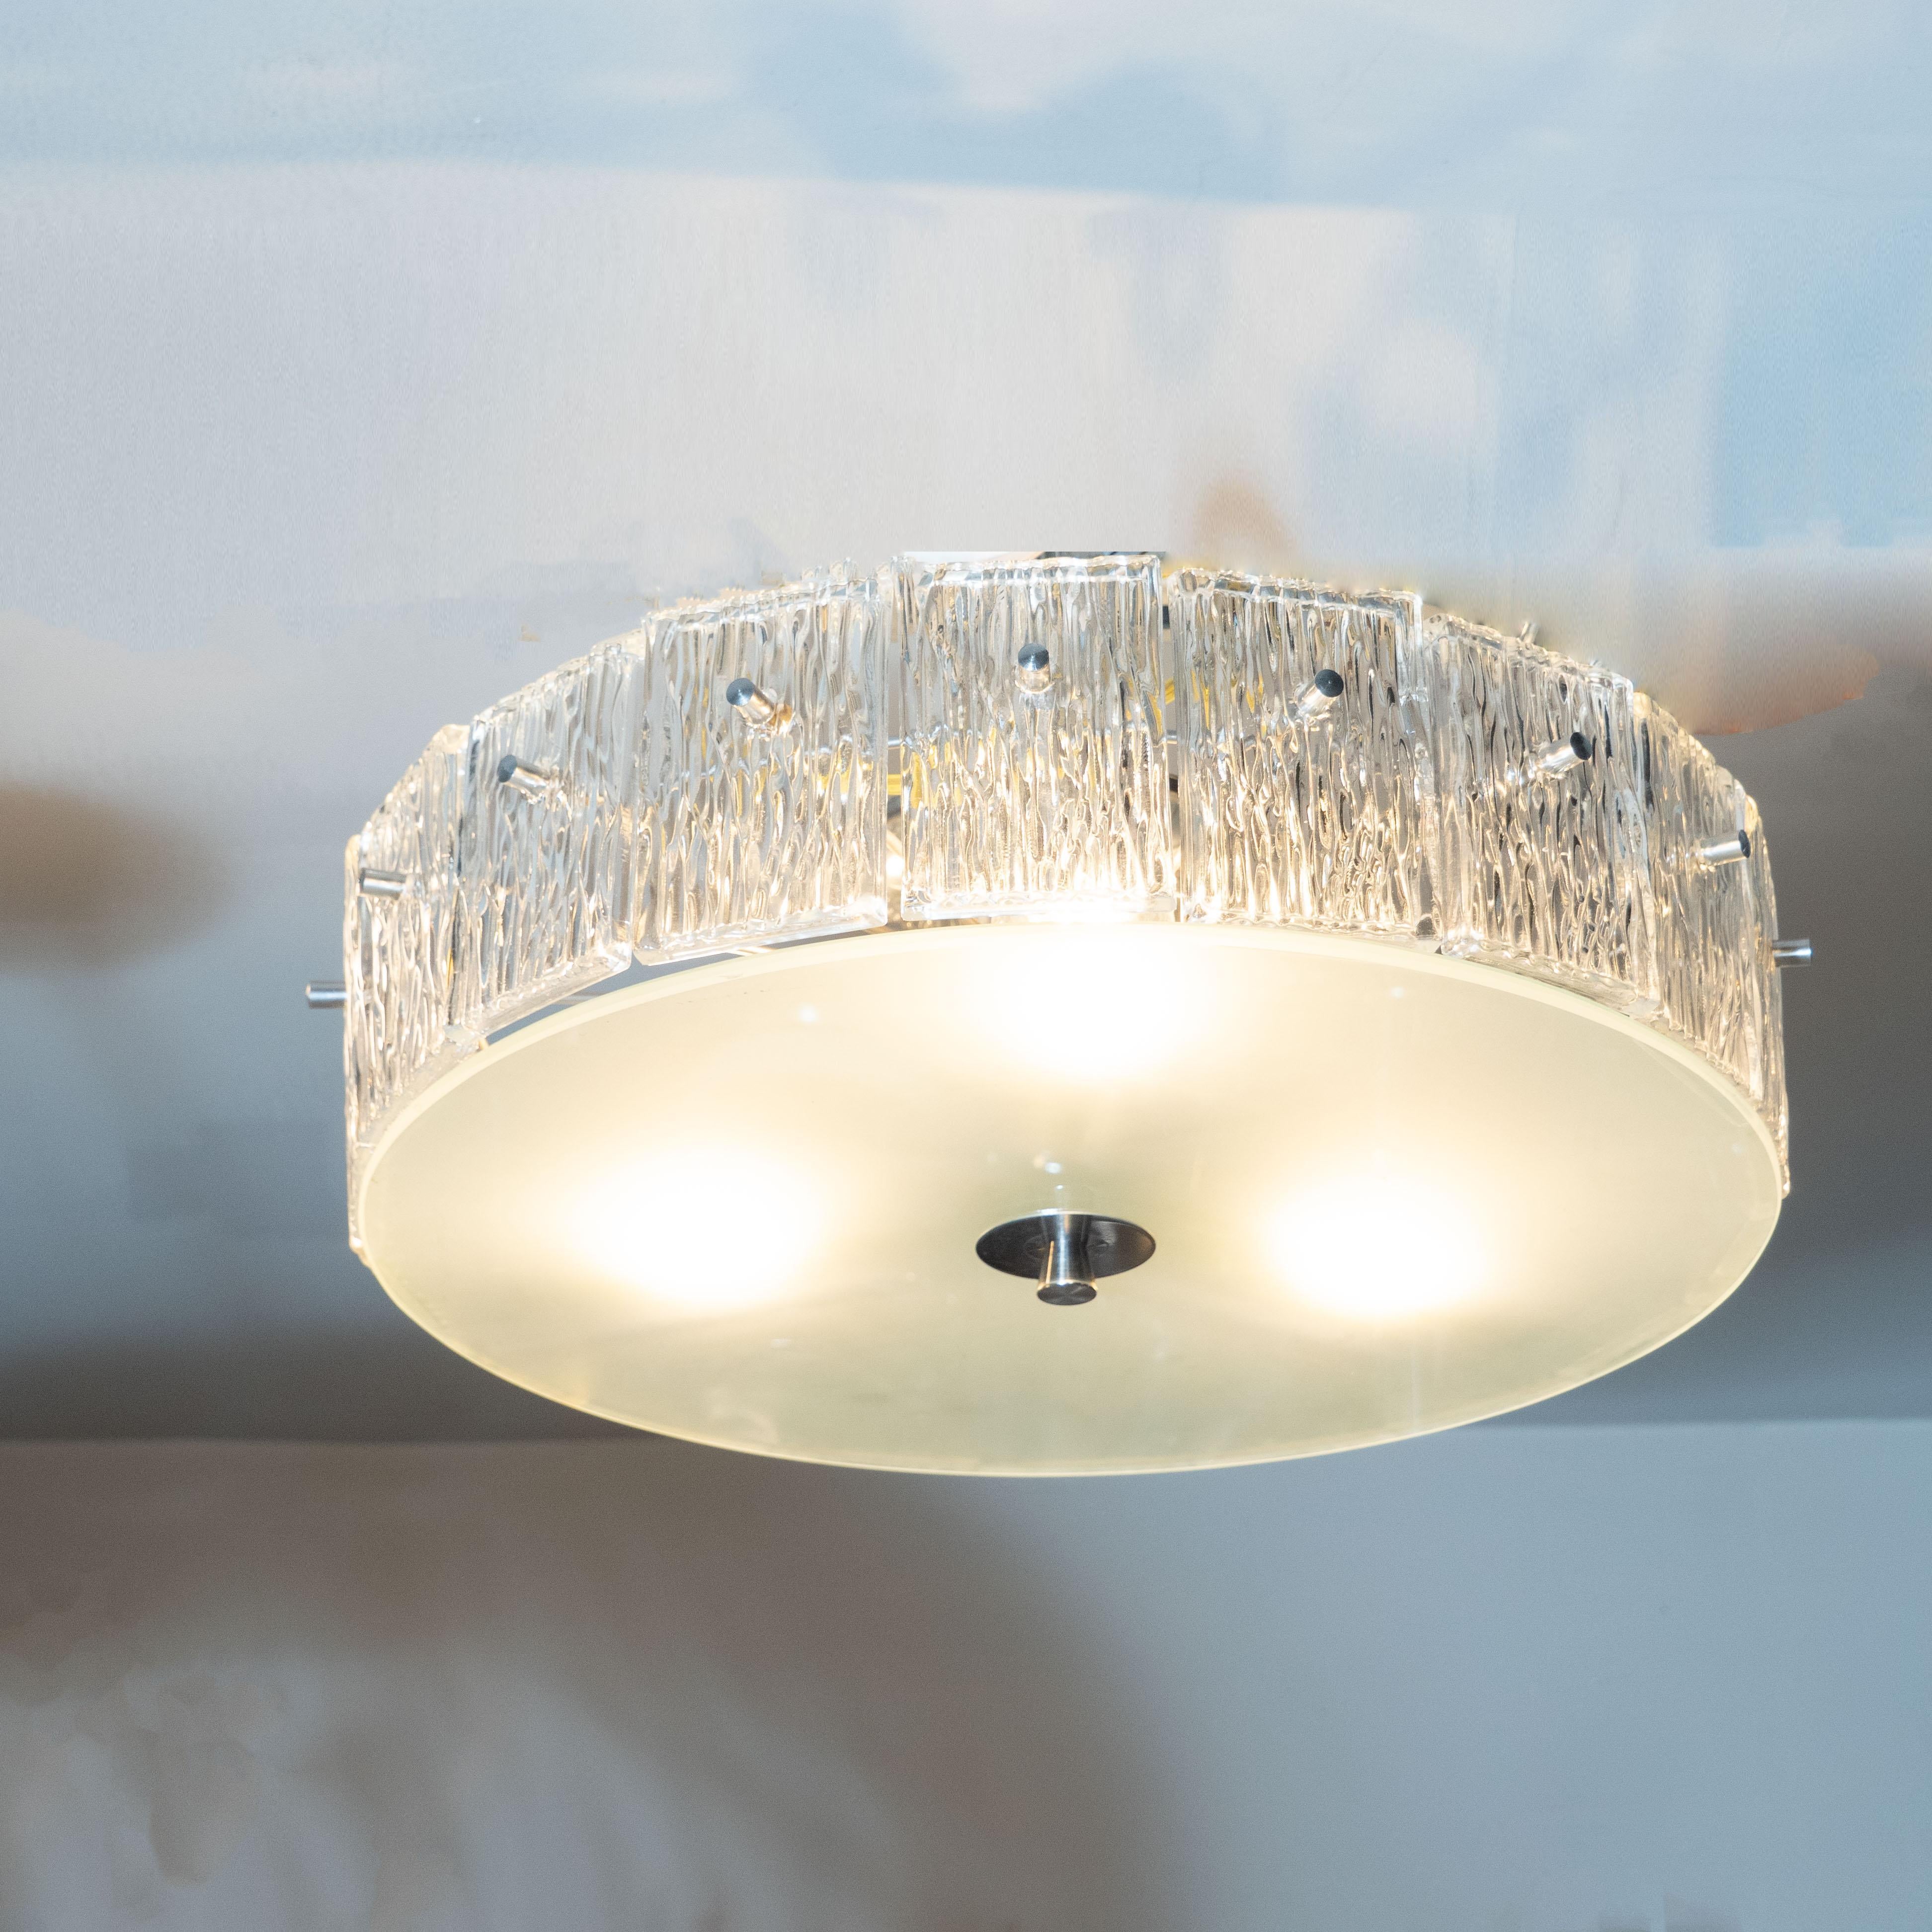 This elegant Mid-Century Modern chandelier was realized by the esteemed Mid-Century Modern maker, Kinkeldey, in Germany, circa 1960. It features a volumetric circular body with an abundance of rectangular glass shades- each with an organic texture